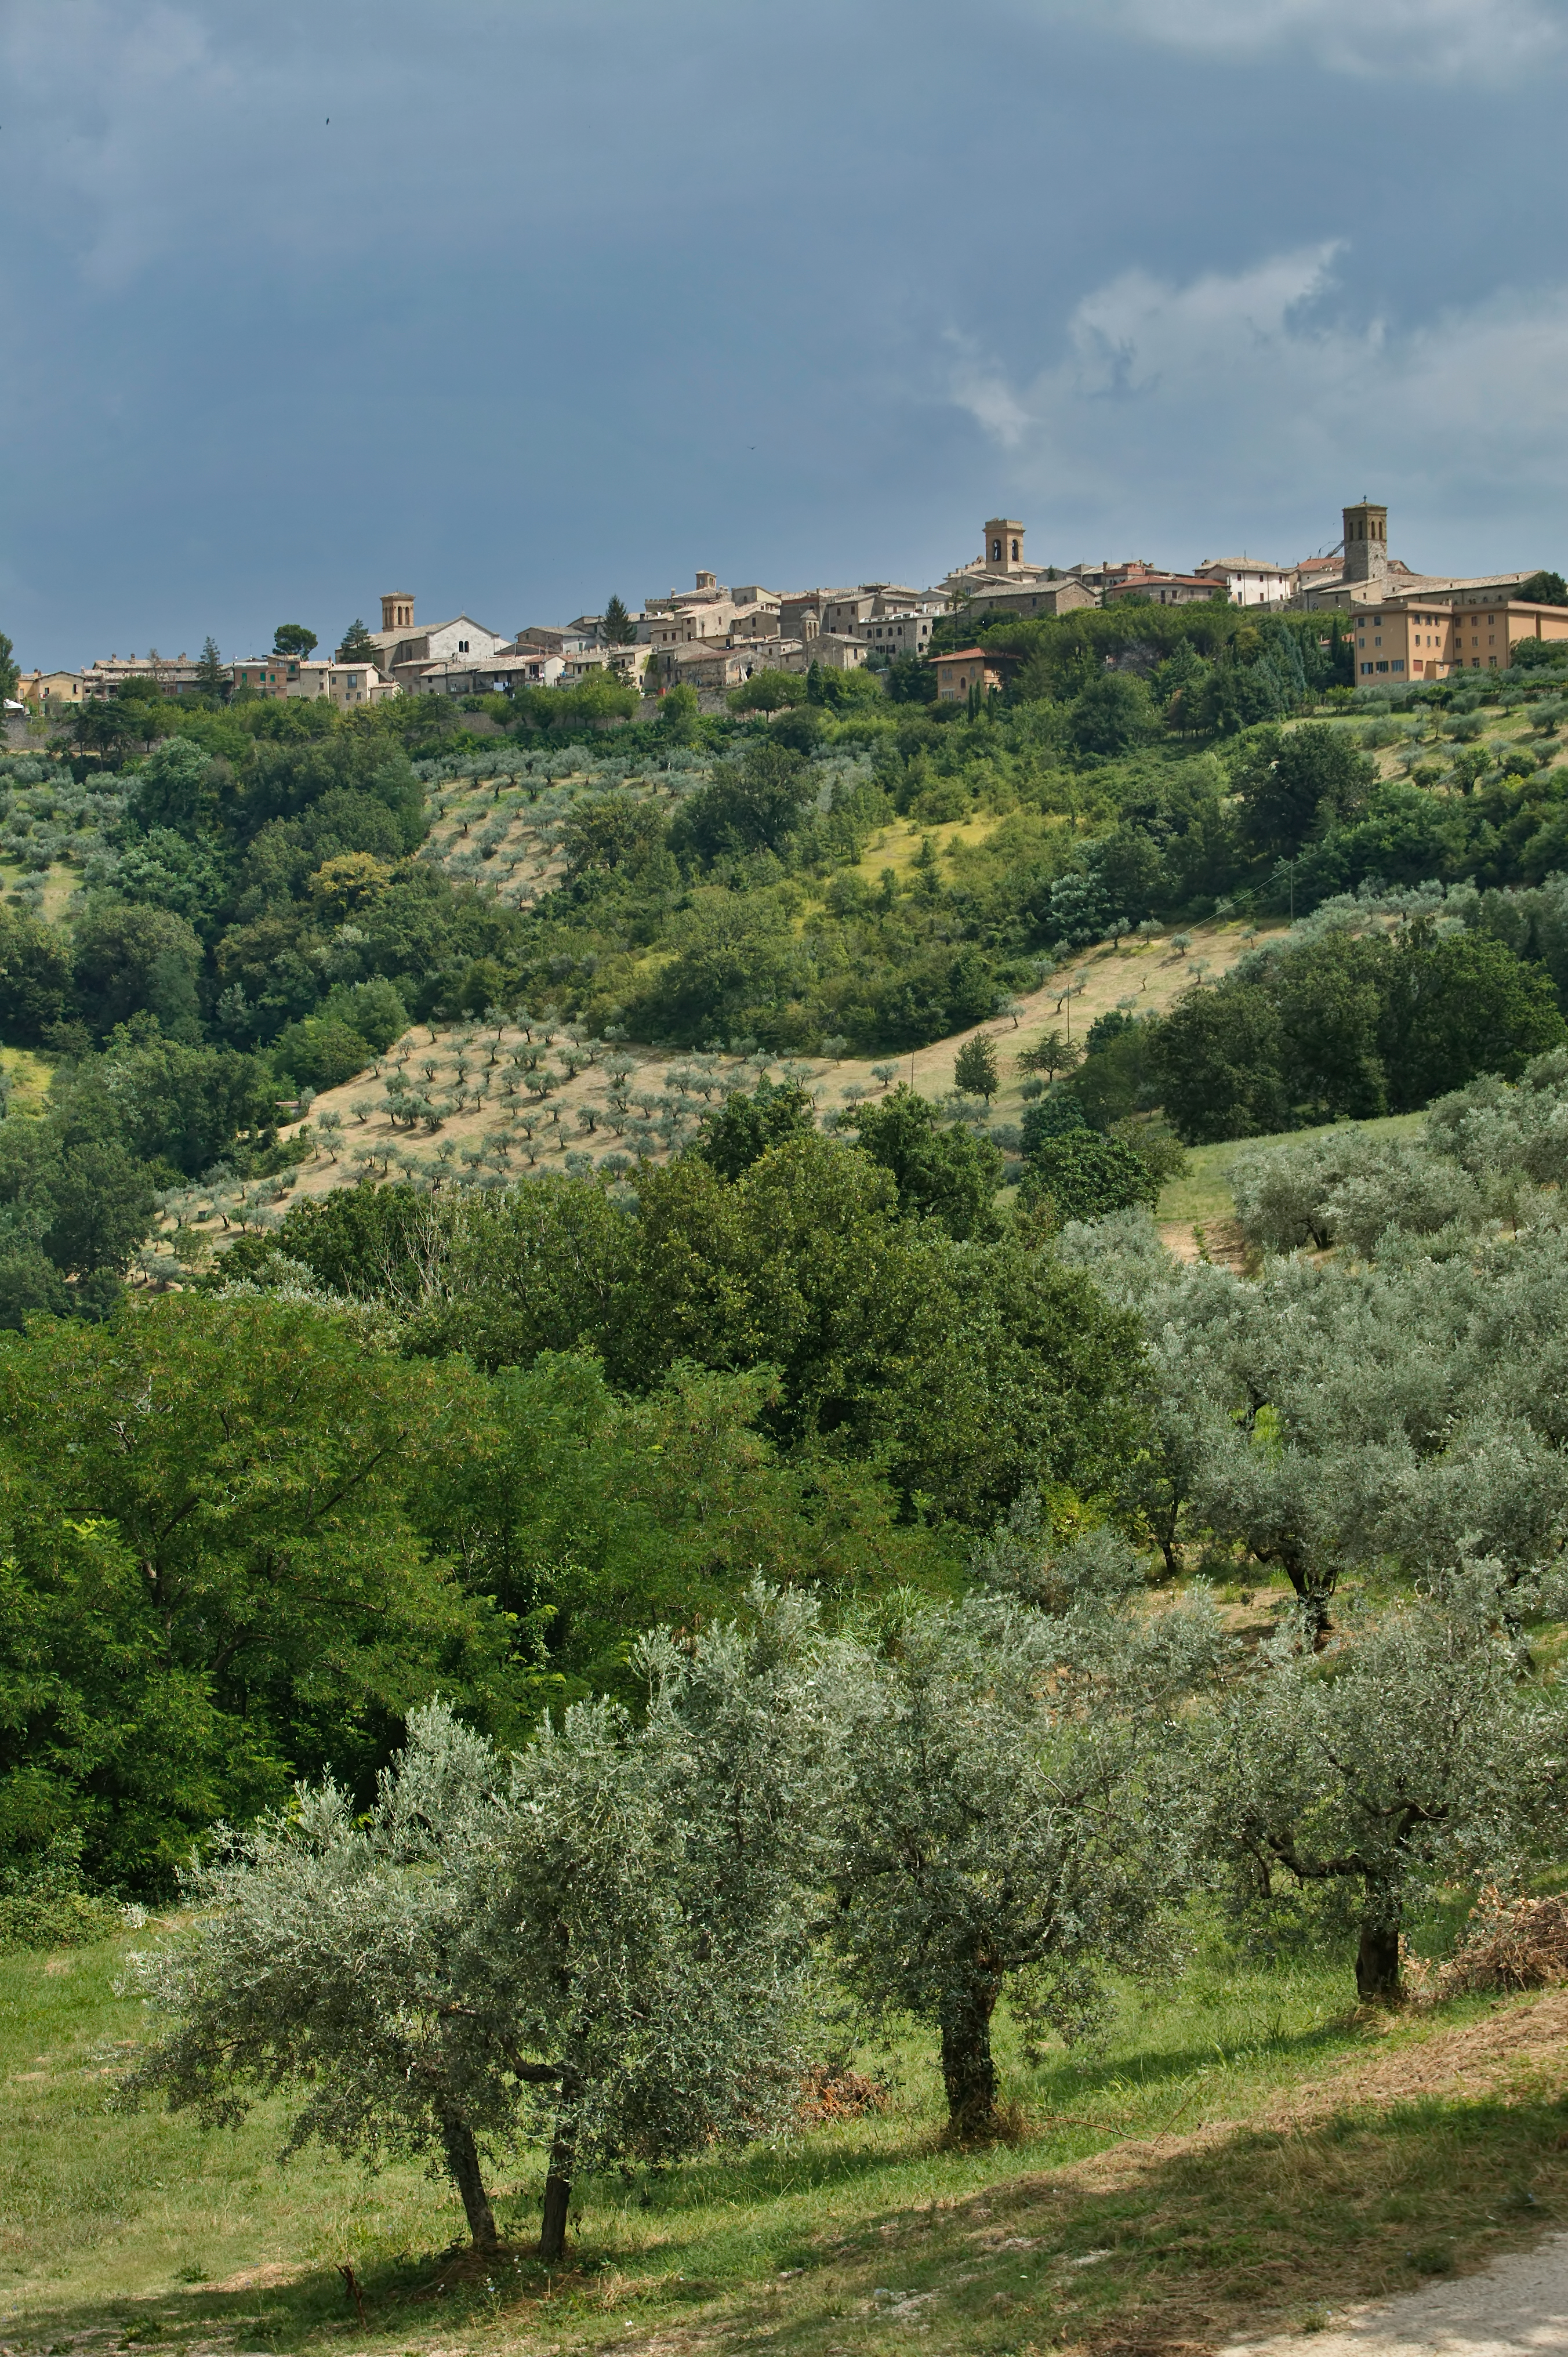 Montefalco: view of the small town and the surrounding coutryside.